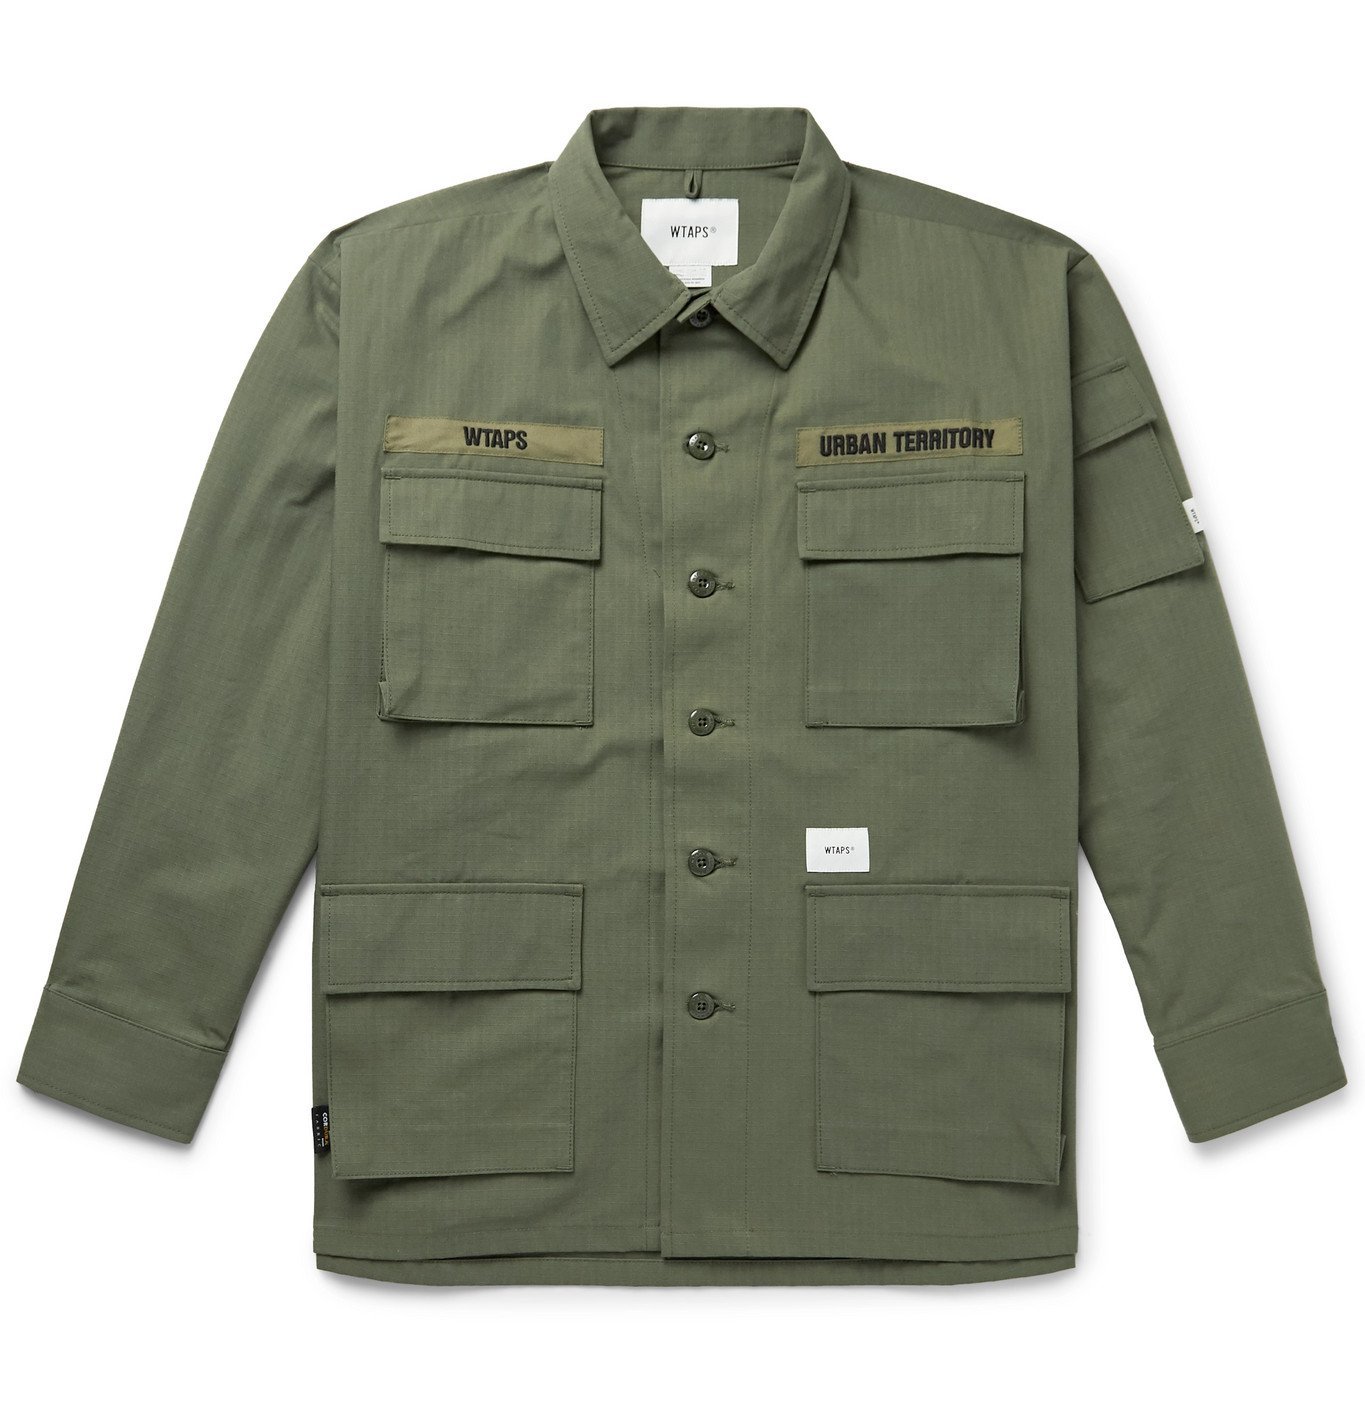 WTAPS - Jungle Embroidered CORDURA and Cotton-Blend Ripstop Overshirt